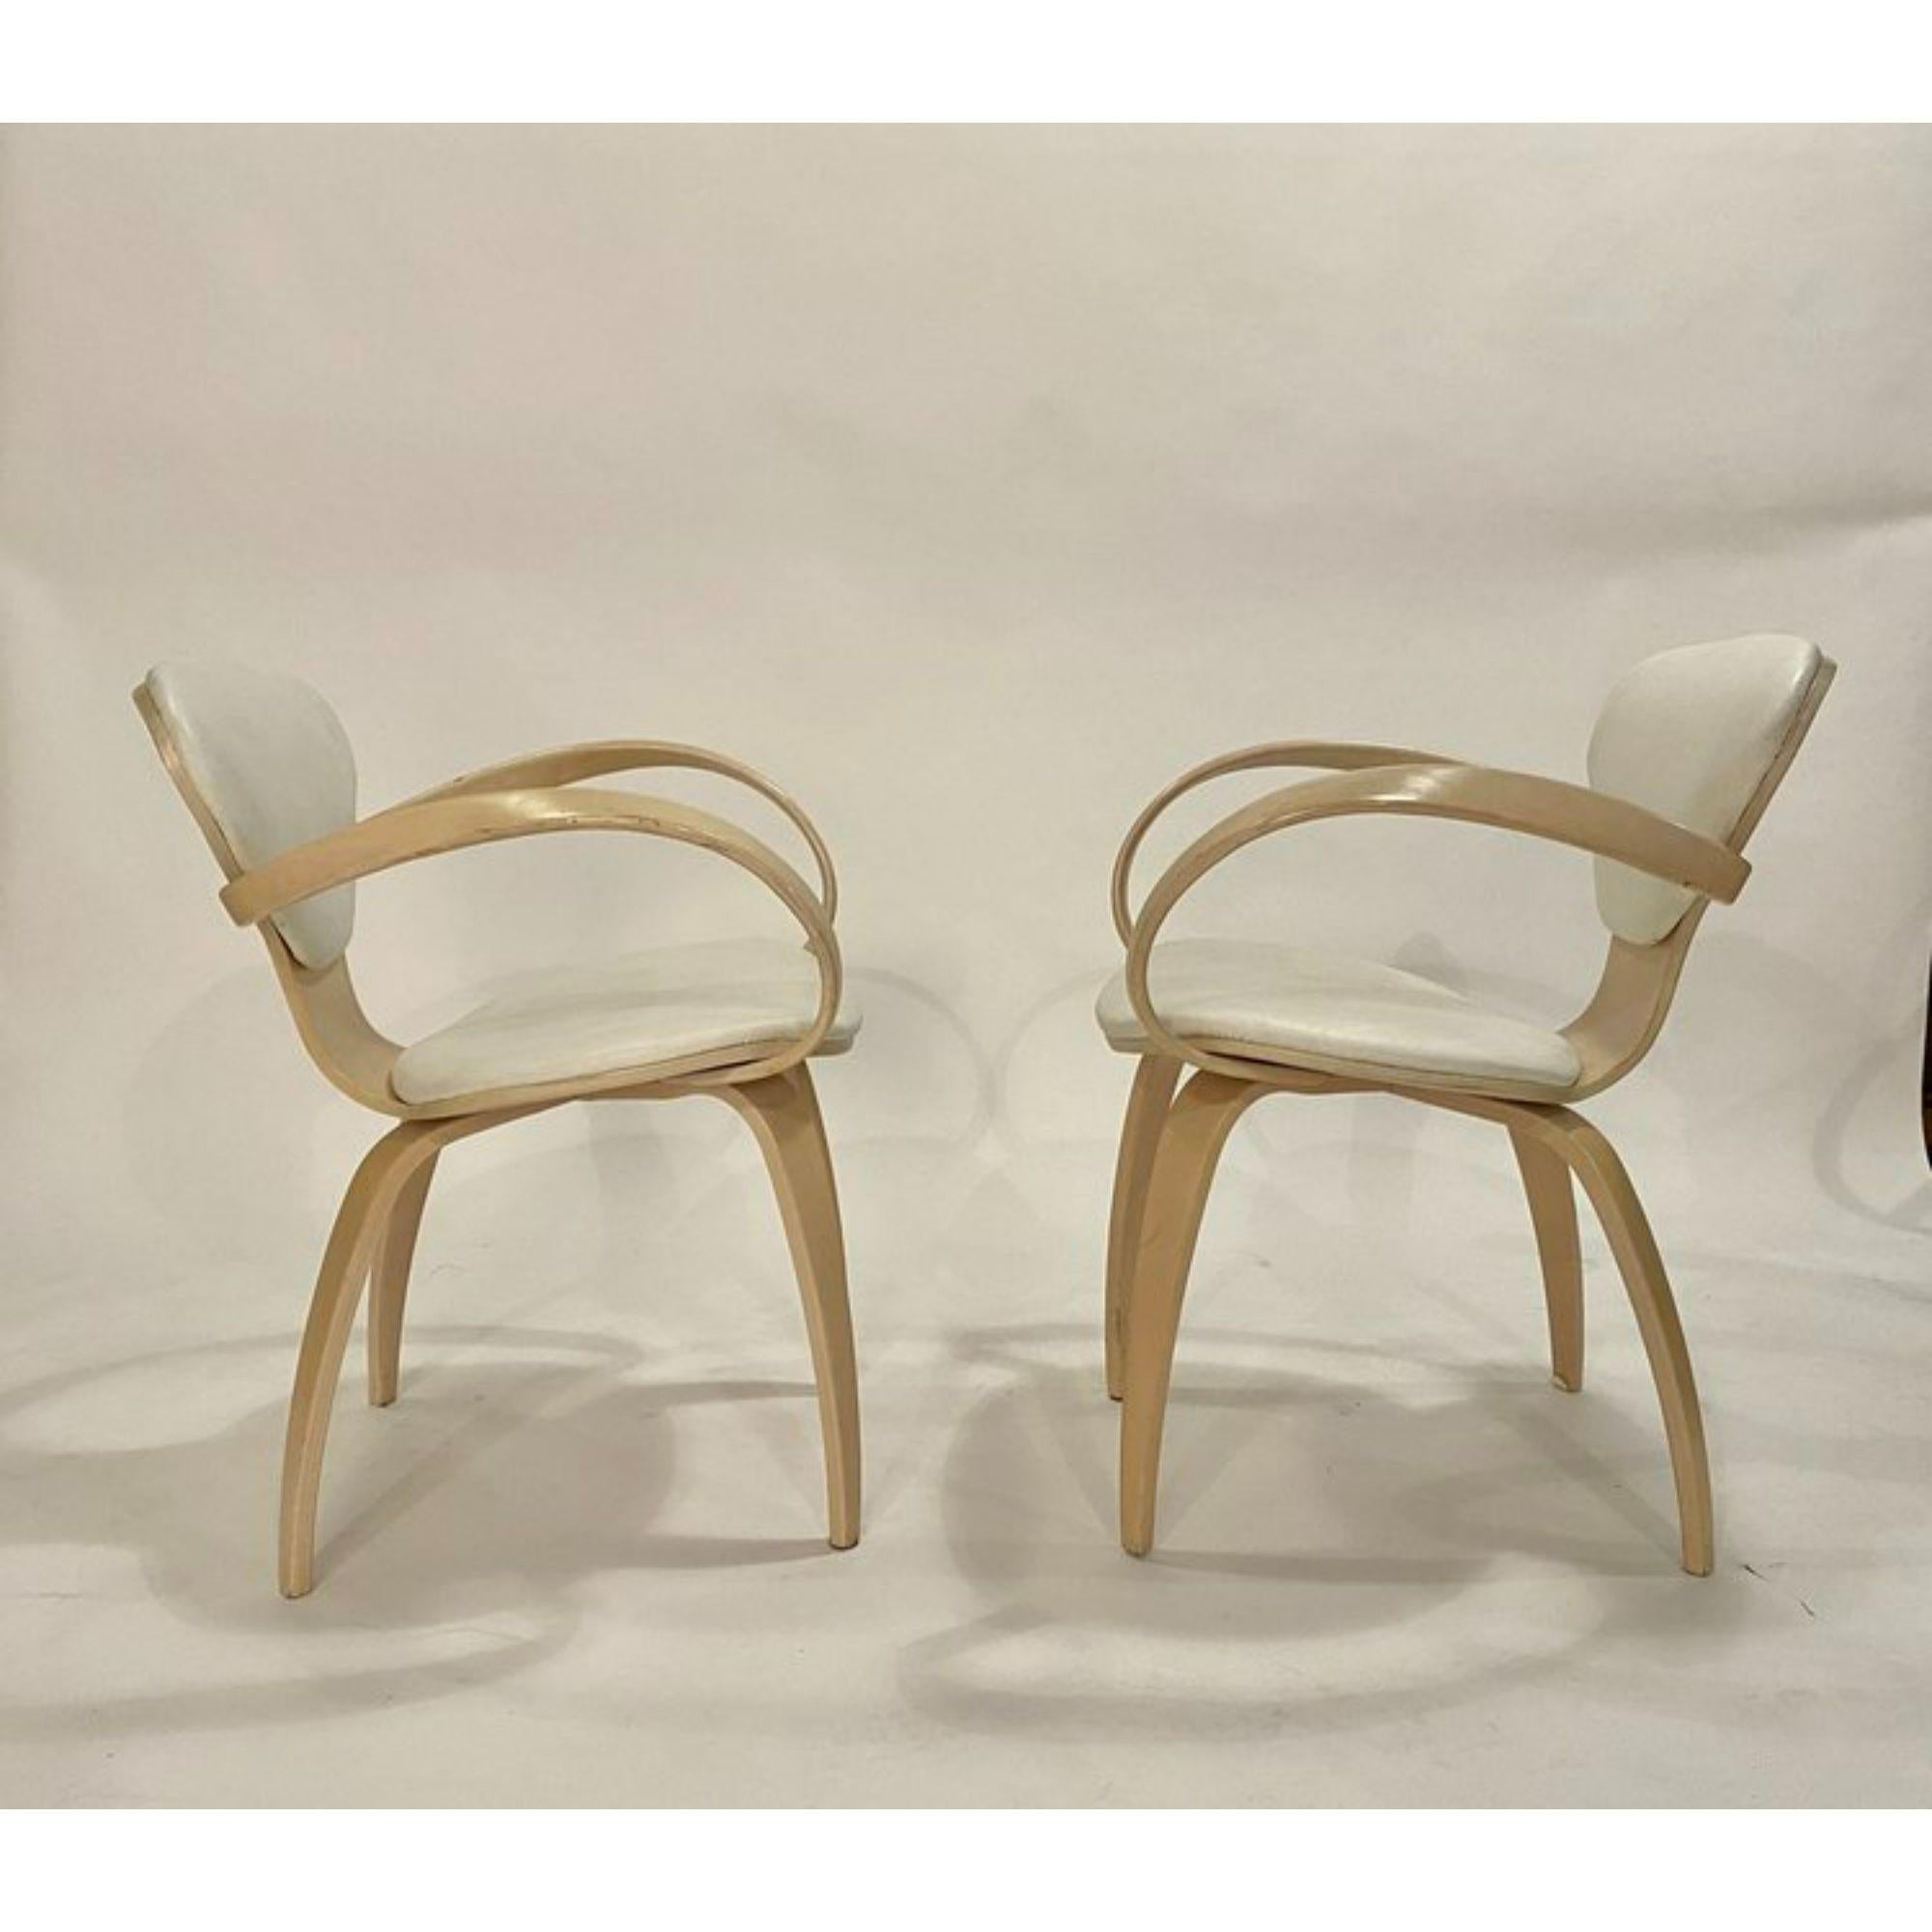 Mid-Century Modern Norman Cherner Pretzel Chairs in Leather and Wood Frame by Plycraft, Set of 4 For Sale